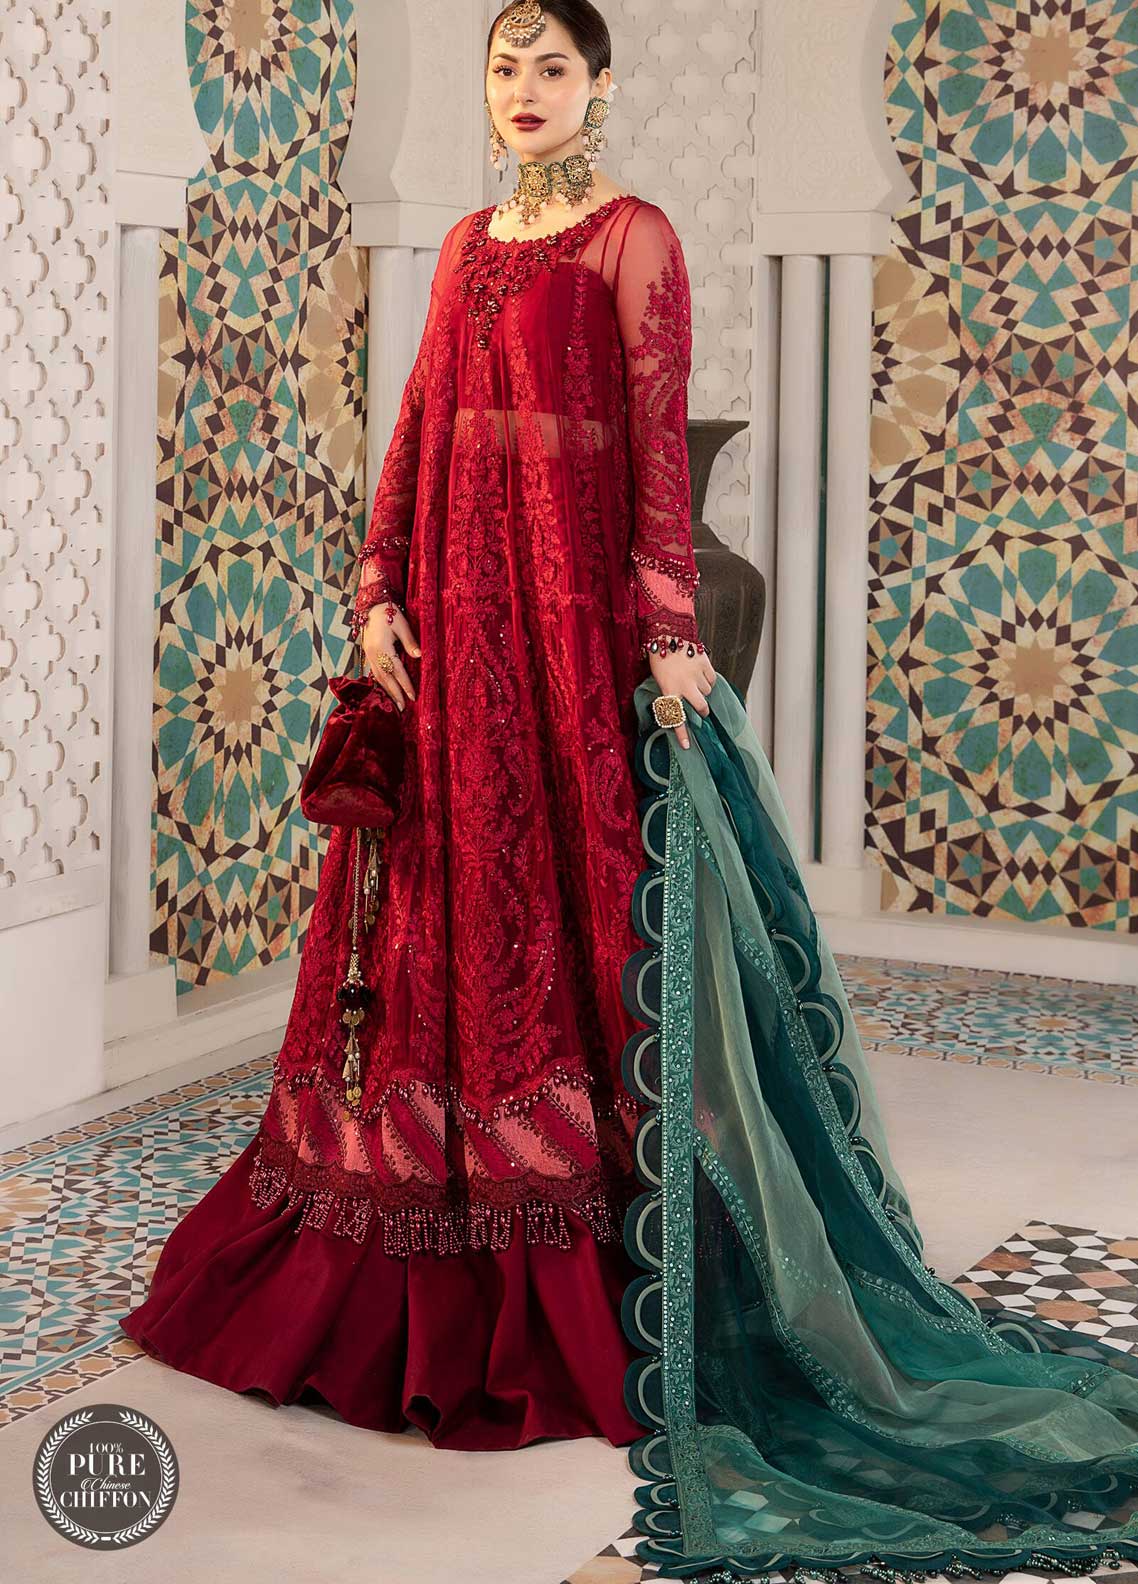 Maria B Embroidered Chiffon Suit Unstitched 3 Piece 02 Cherry red with Shades of Teal MBCE22 – Eid Collection